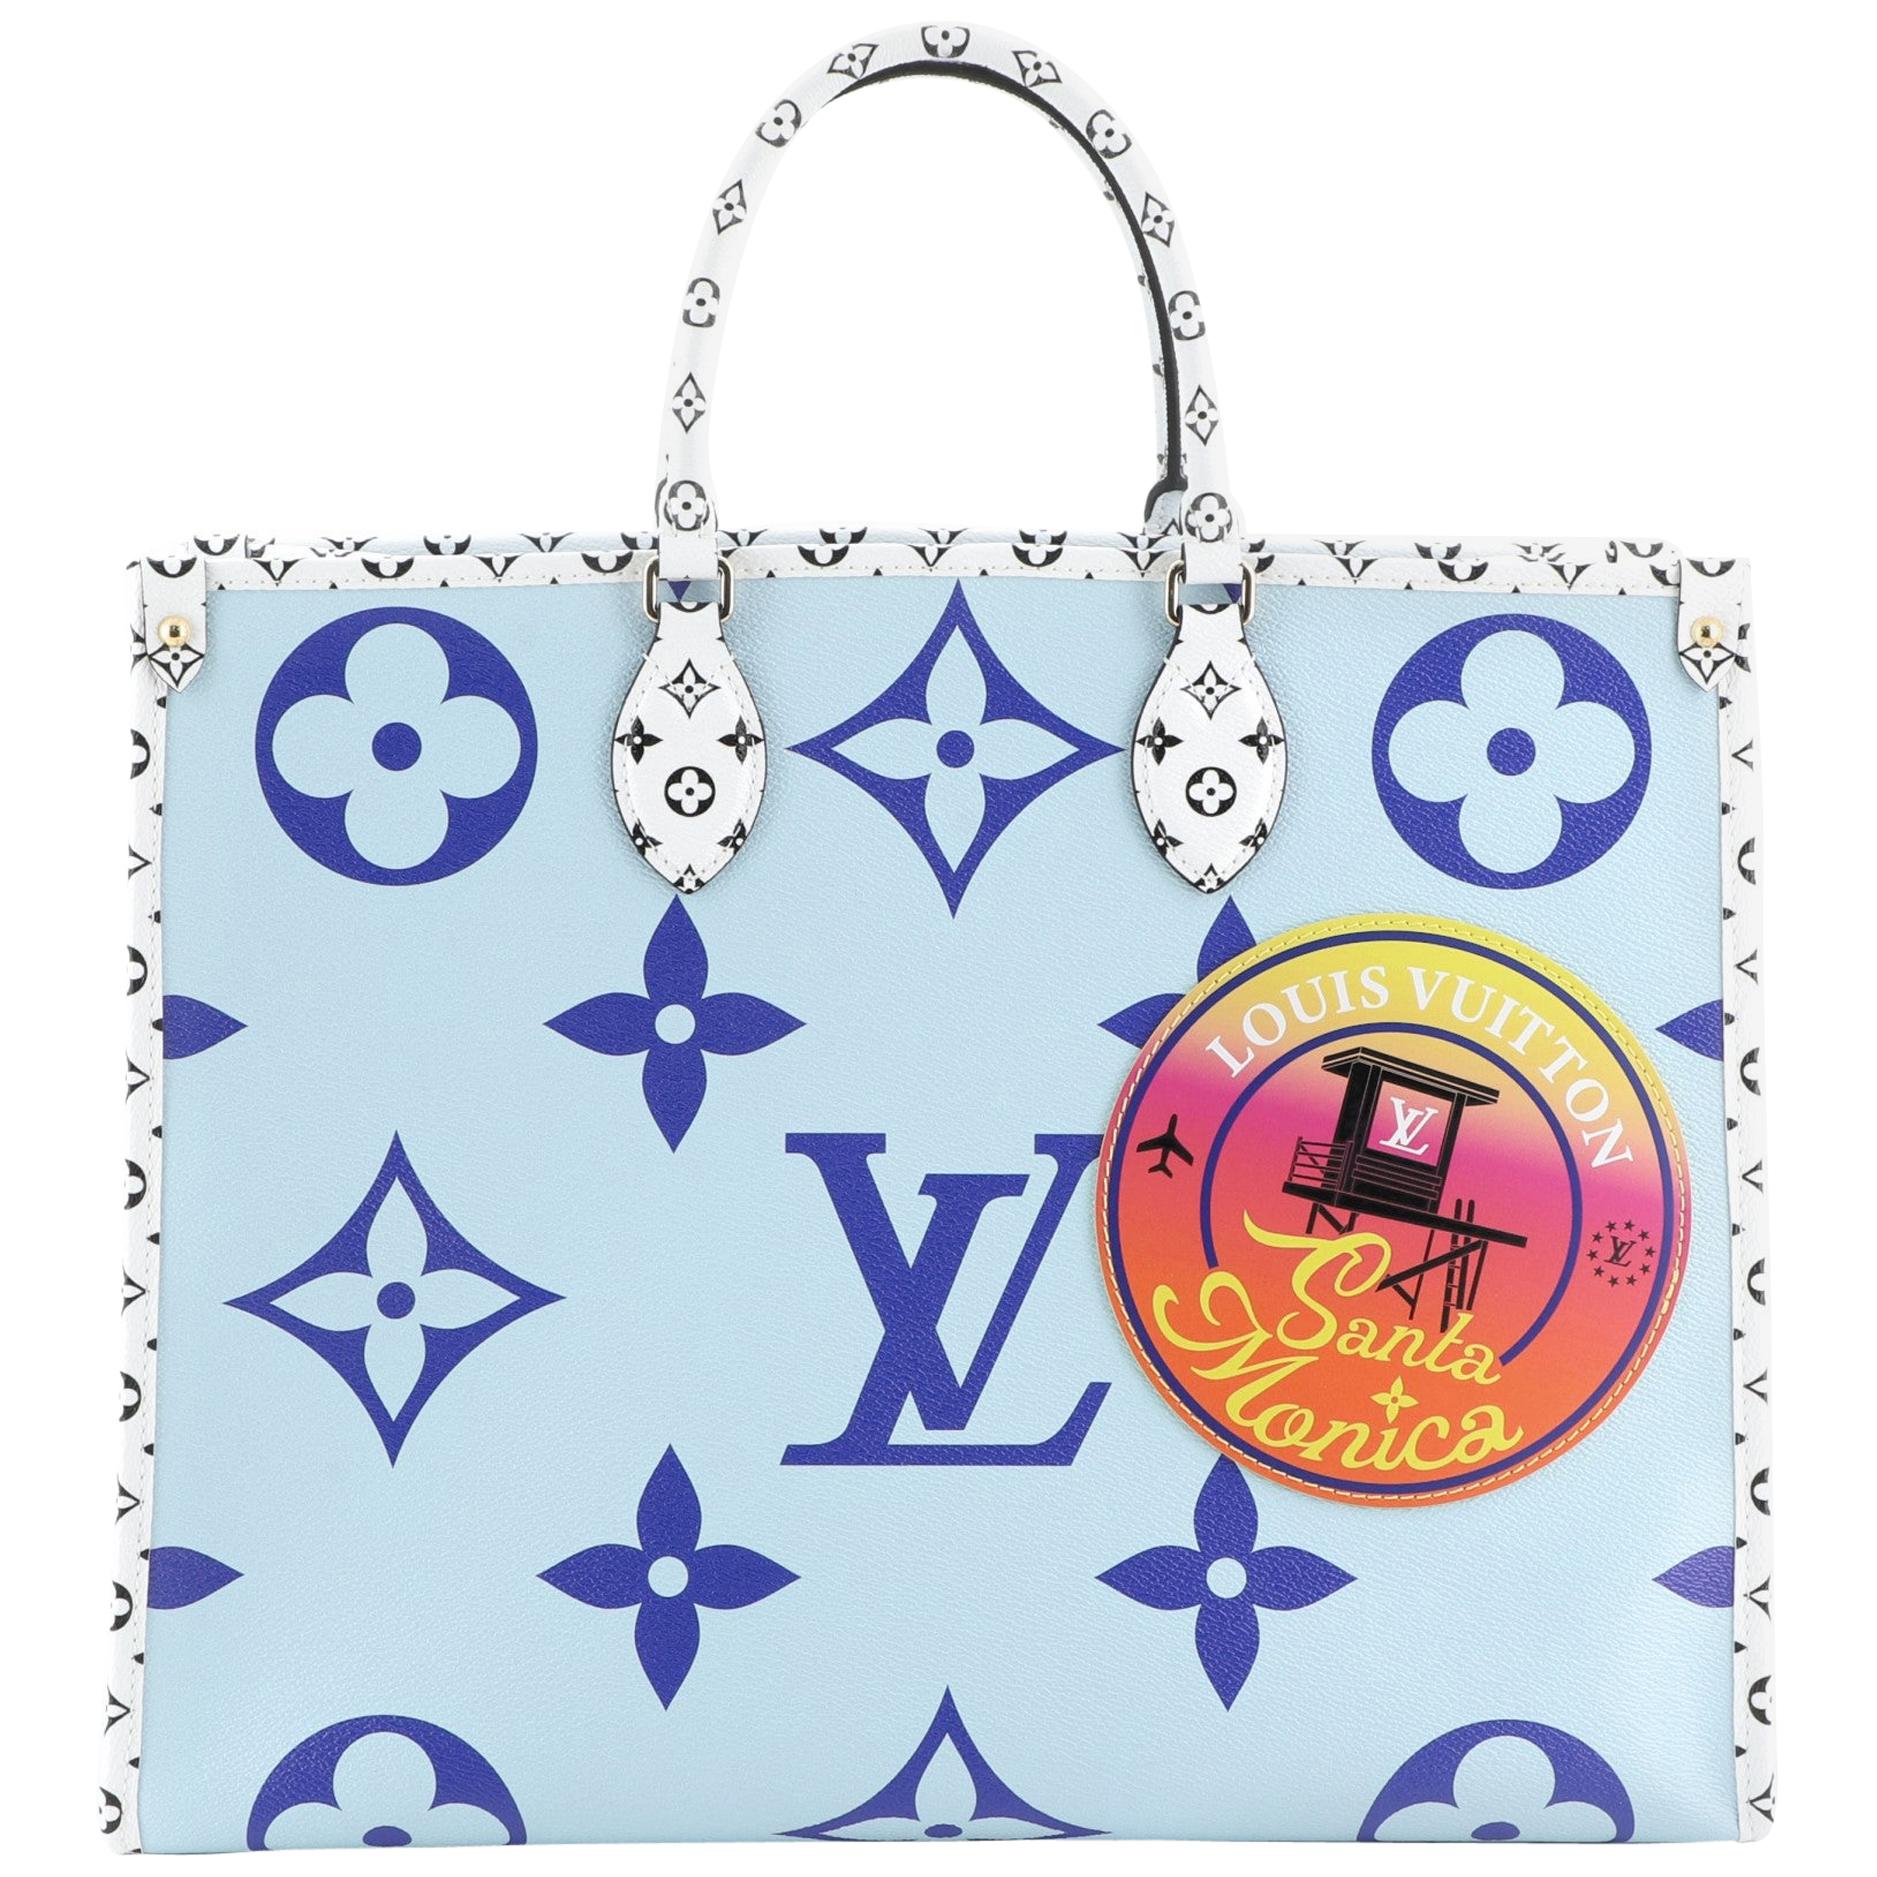 Louis Vuitton OnTheGo Tote Limited Edition Cities Colored Monogram